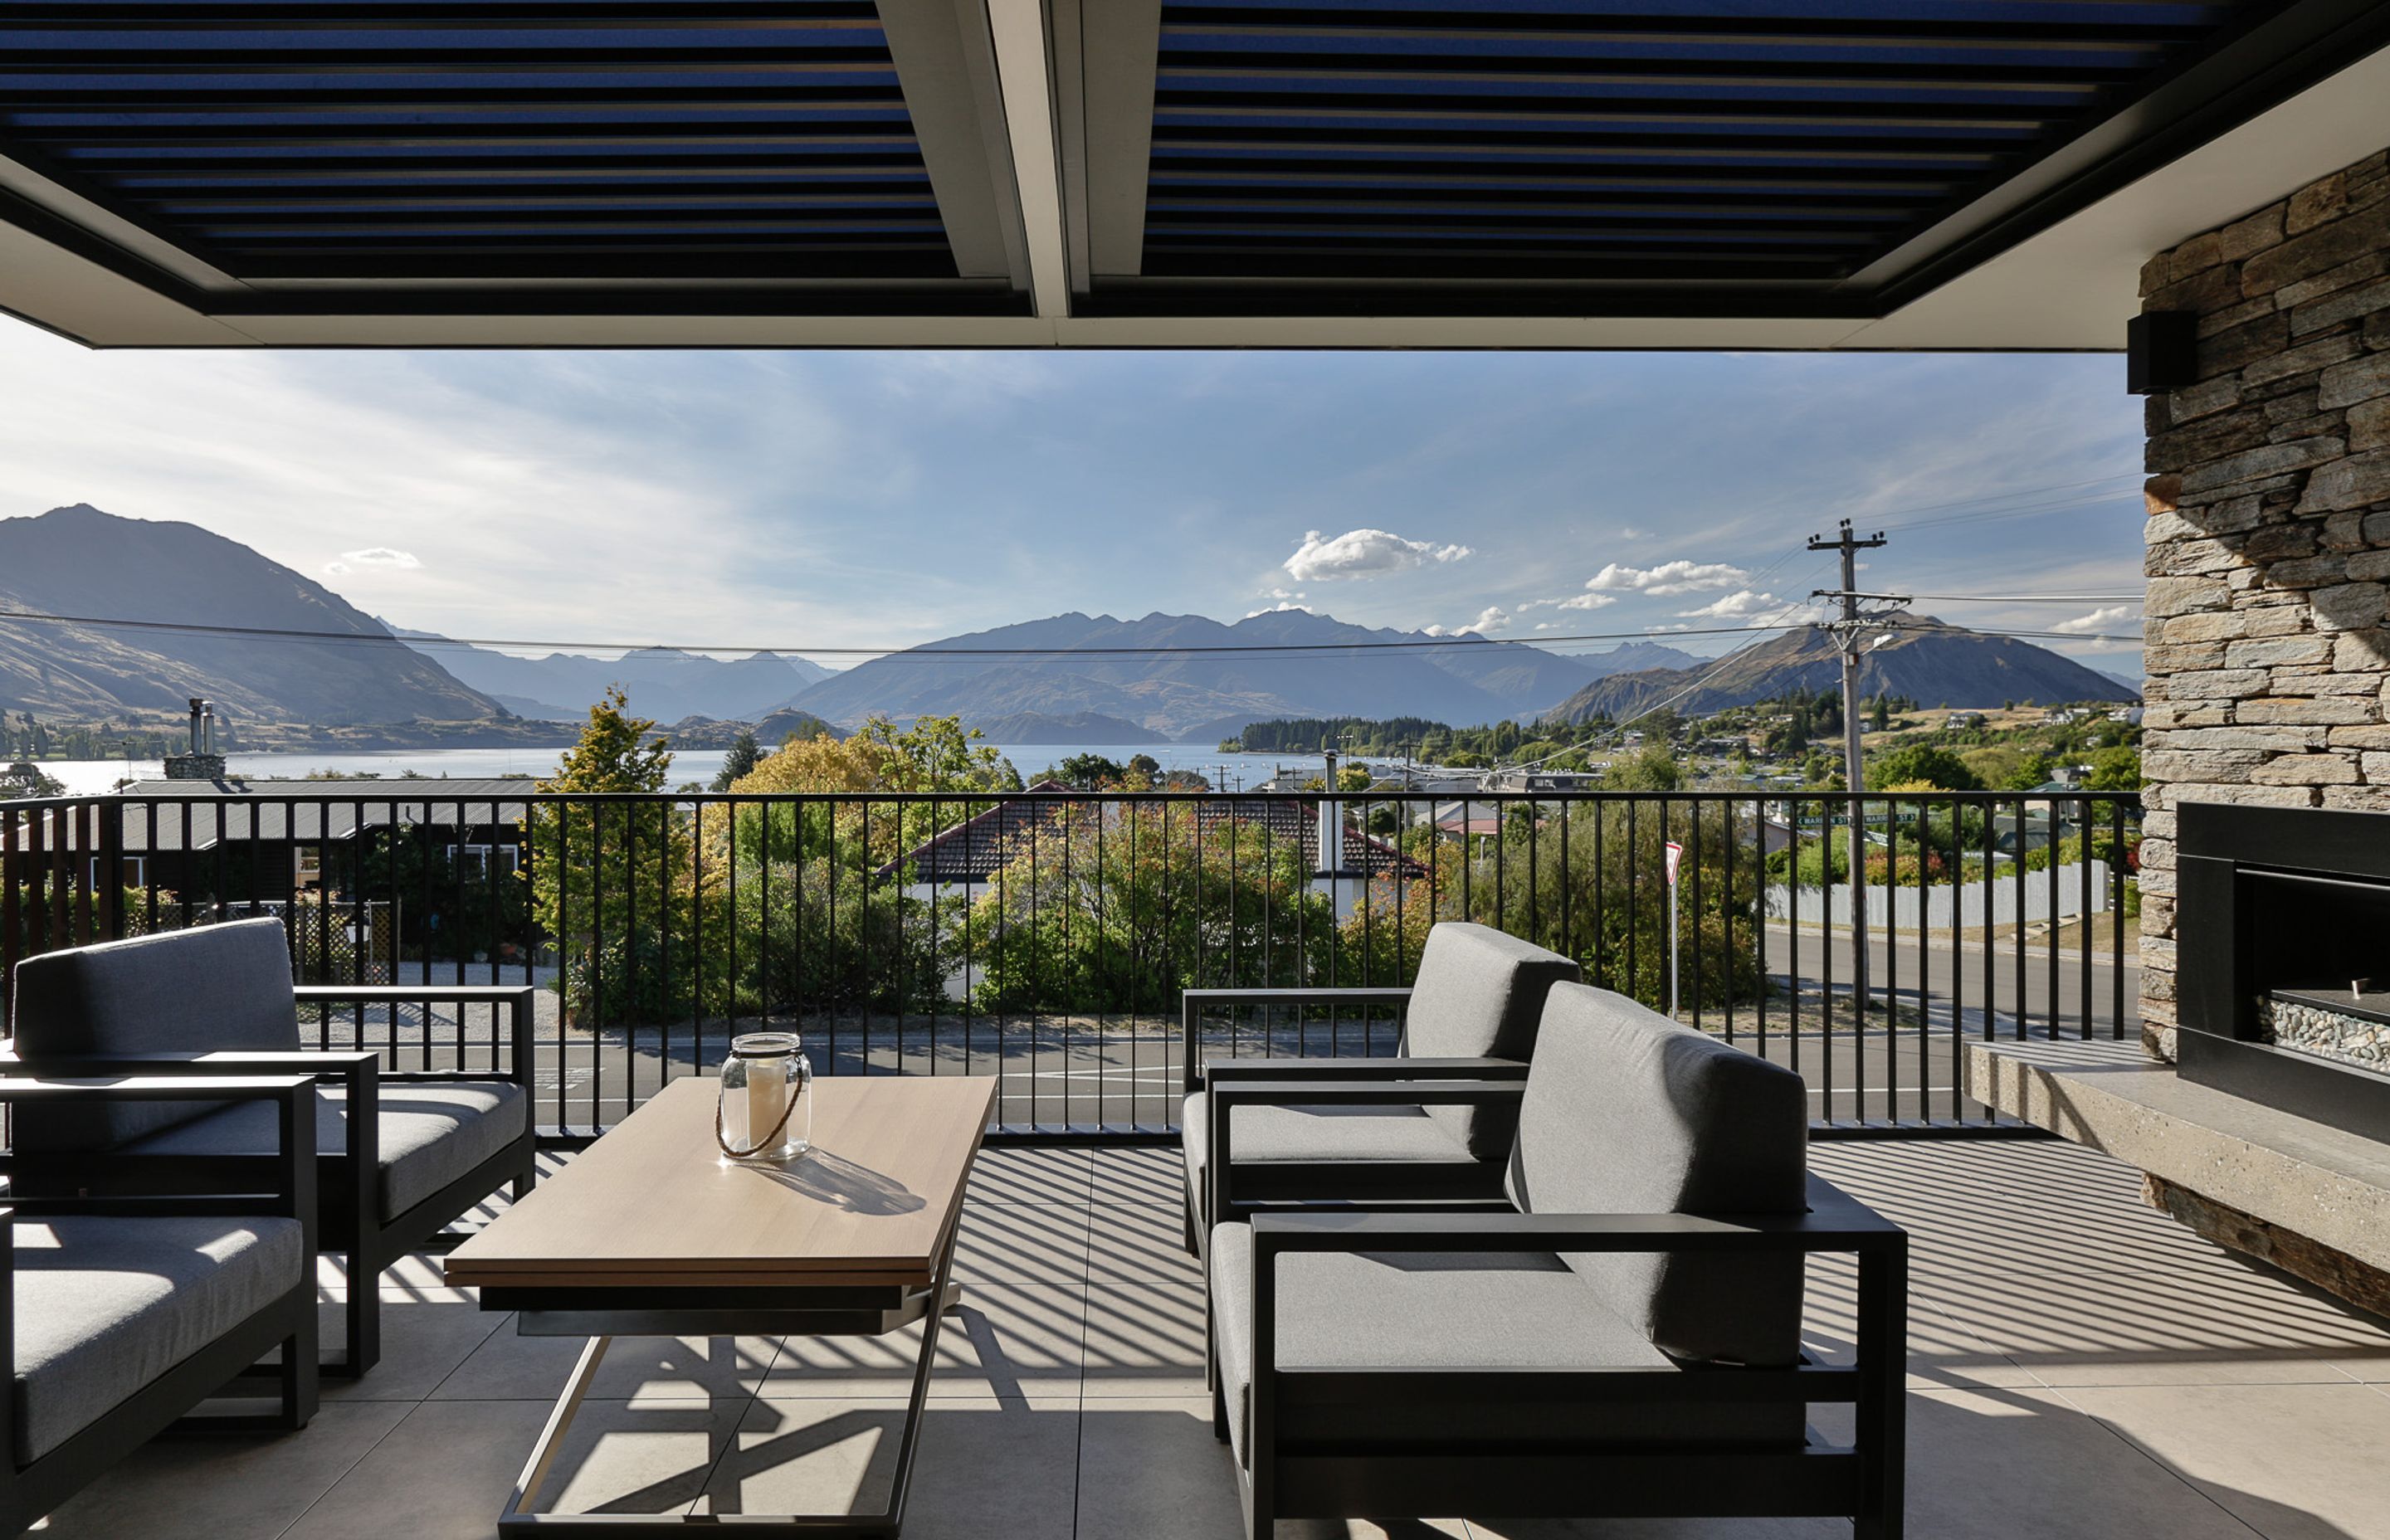 From its elevated position, the balcony enjoys far-reaching views out over the lake.